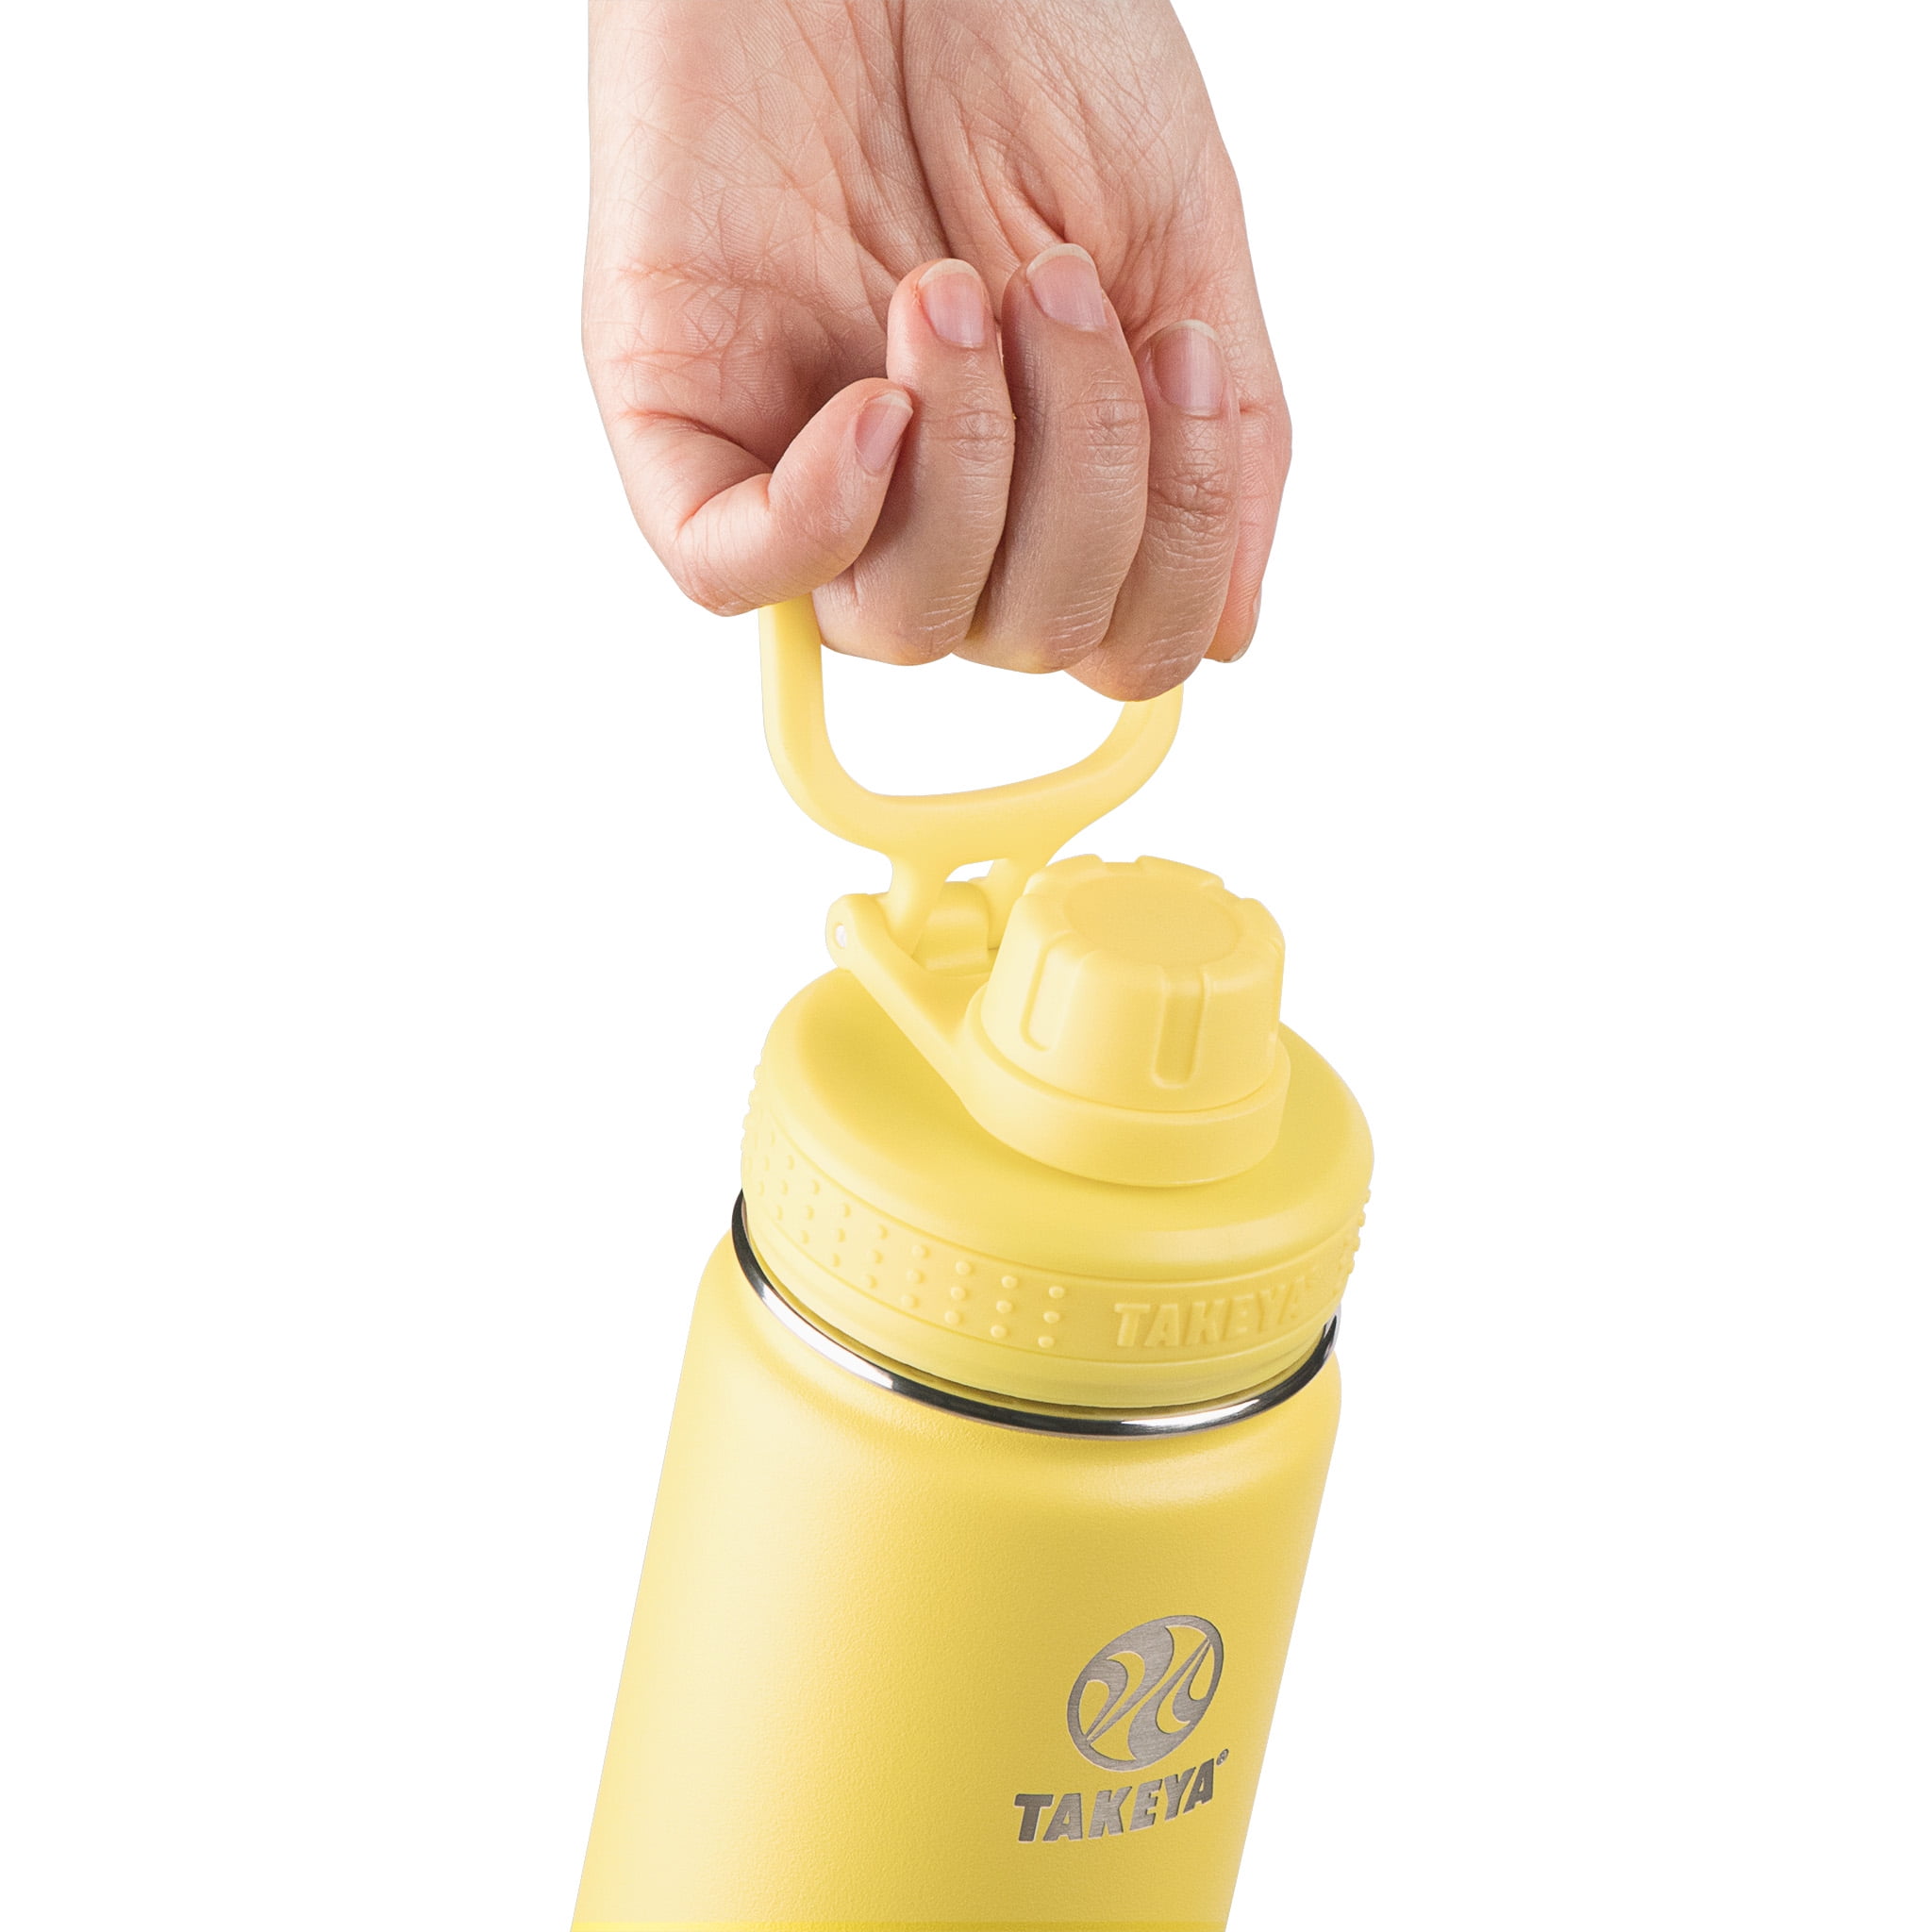 Takeya® 32 oz. Water Bottle w/Actives Insulated Spout Lid™, Laser, Premium  - 76-80813 - IdeaStage Promotional Products